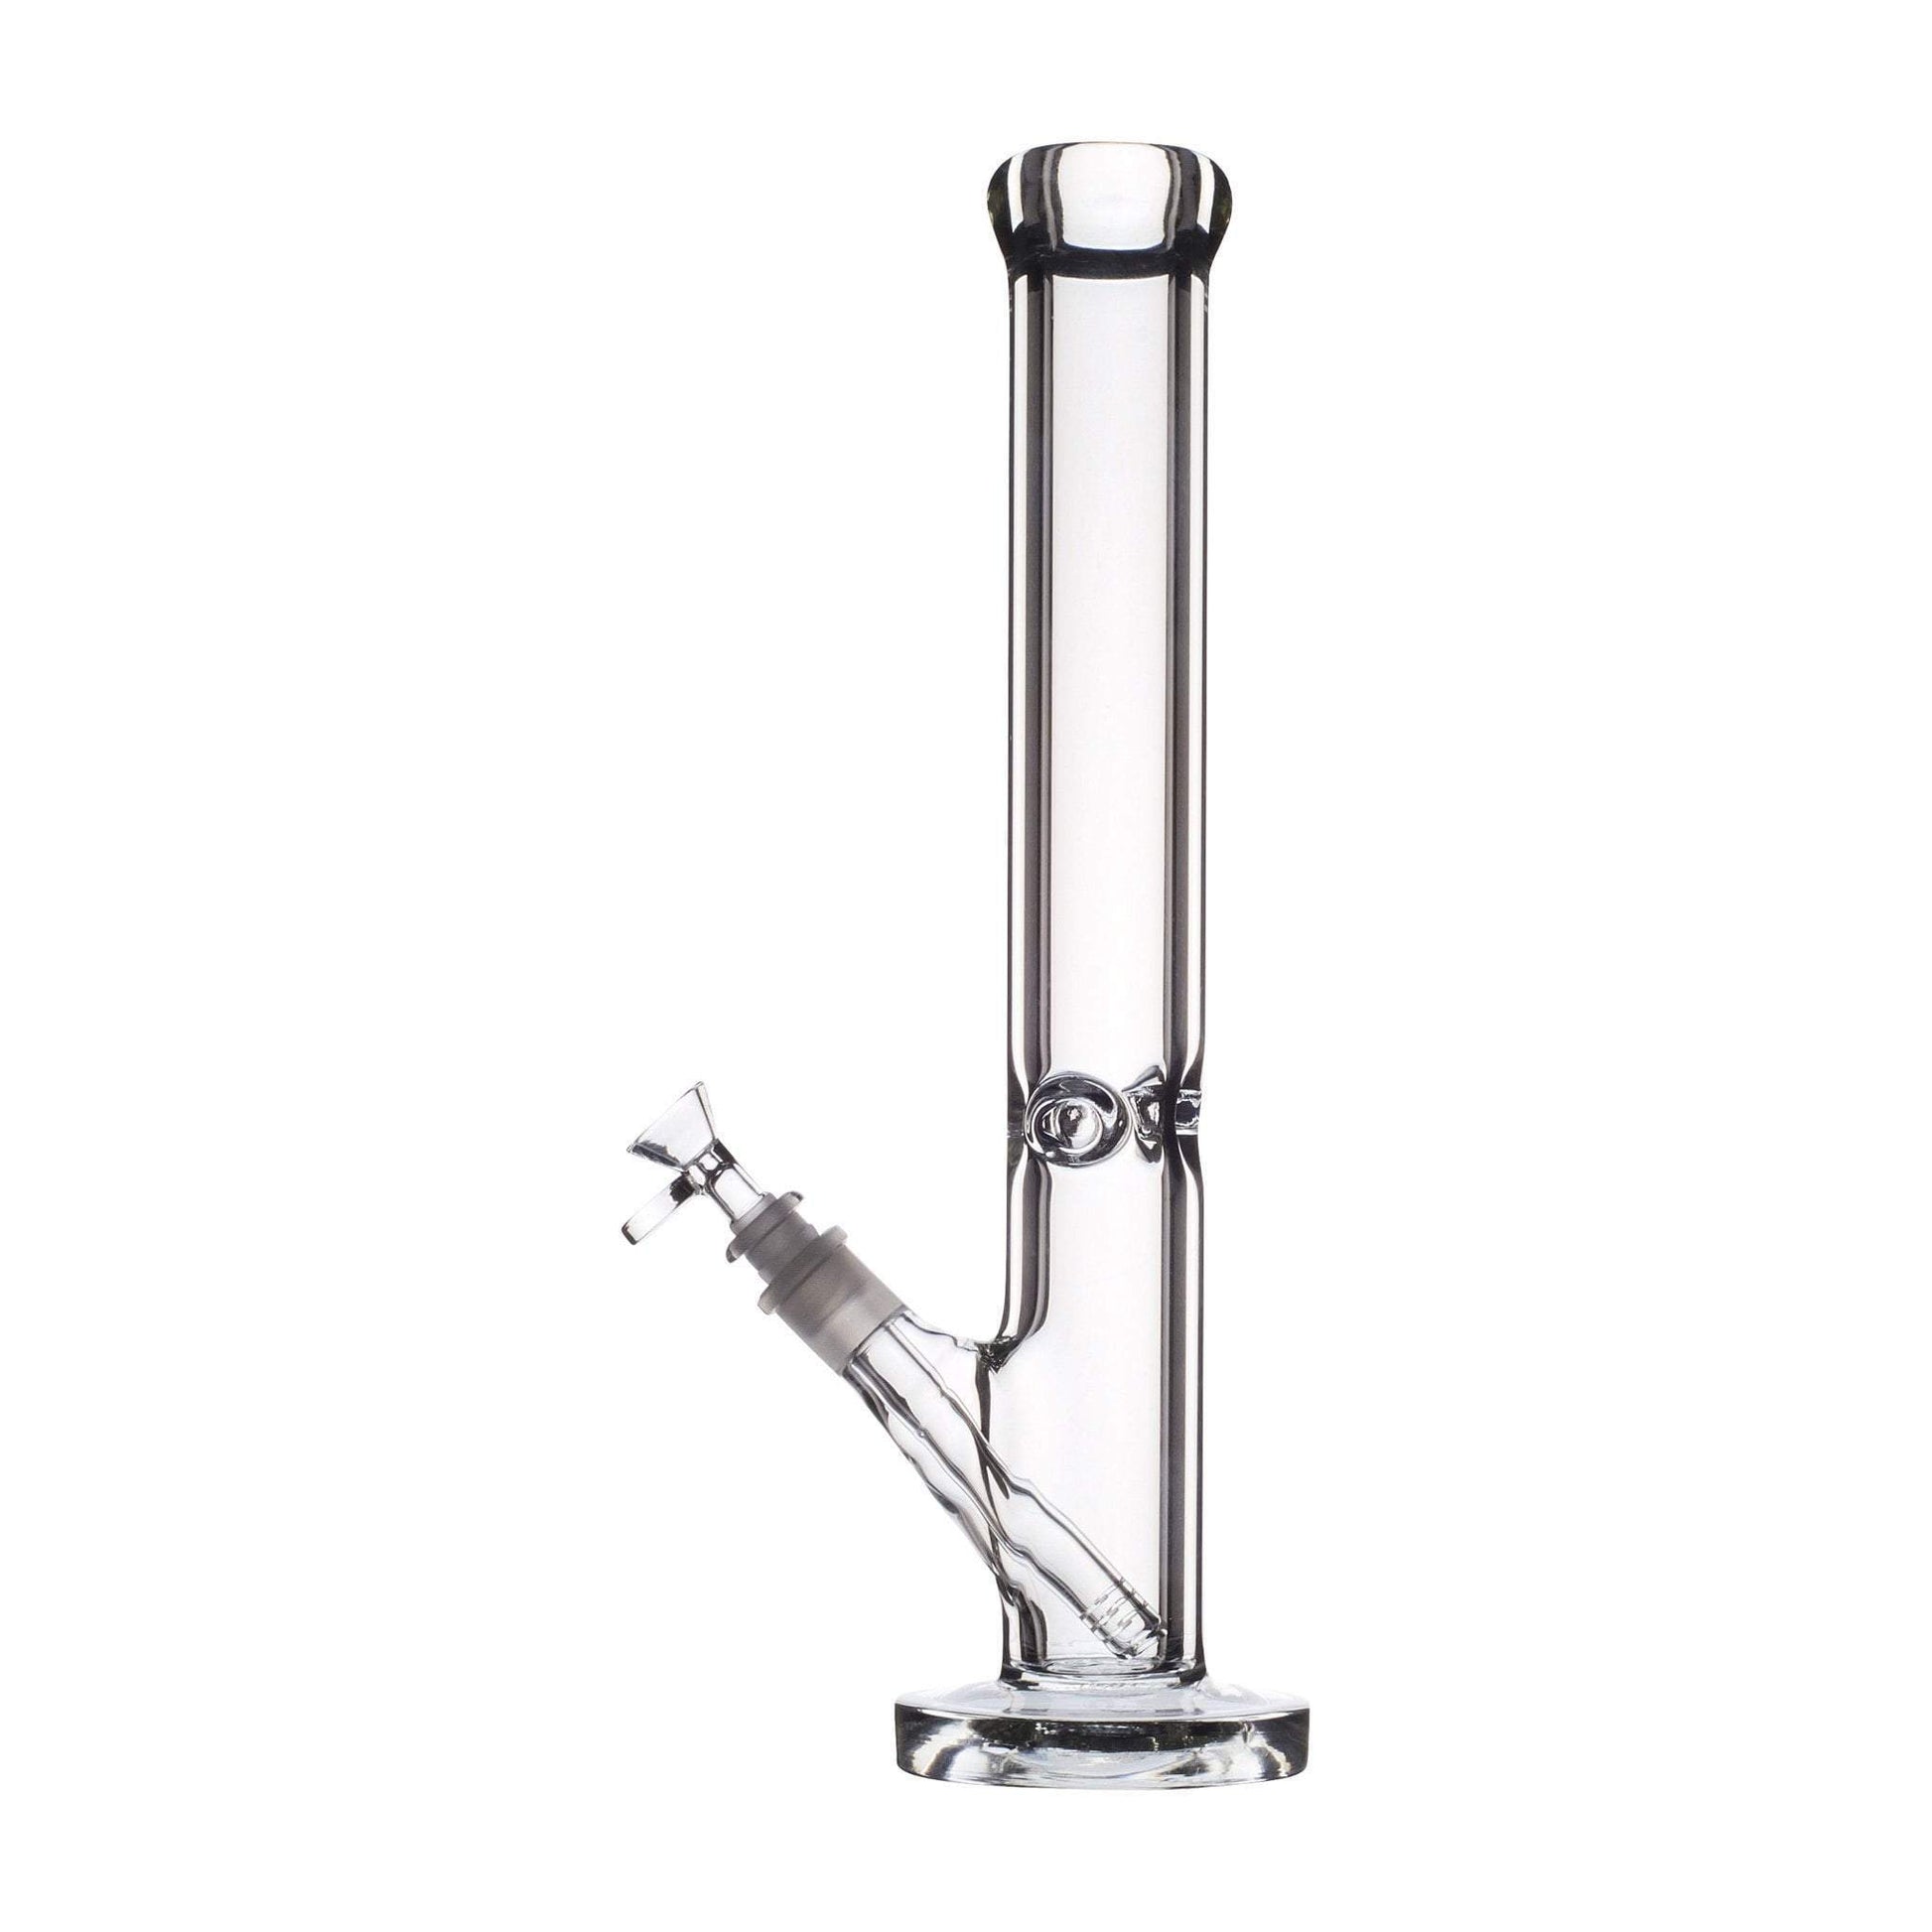 Huge 18-inch thick giant straight cylinder glass bong smoking device percolated downstem with ice catcher sleek design